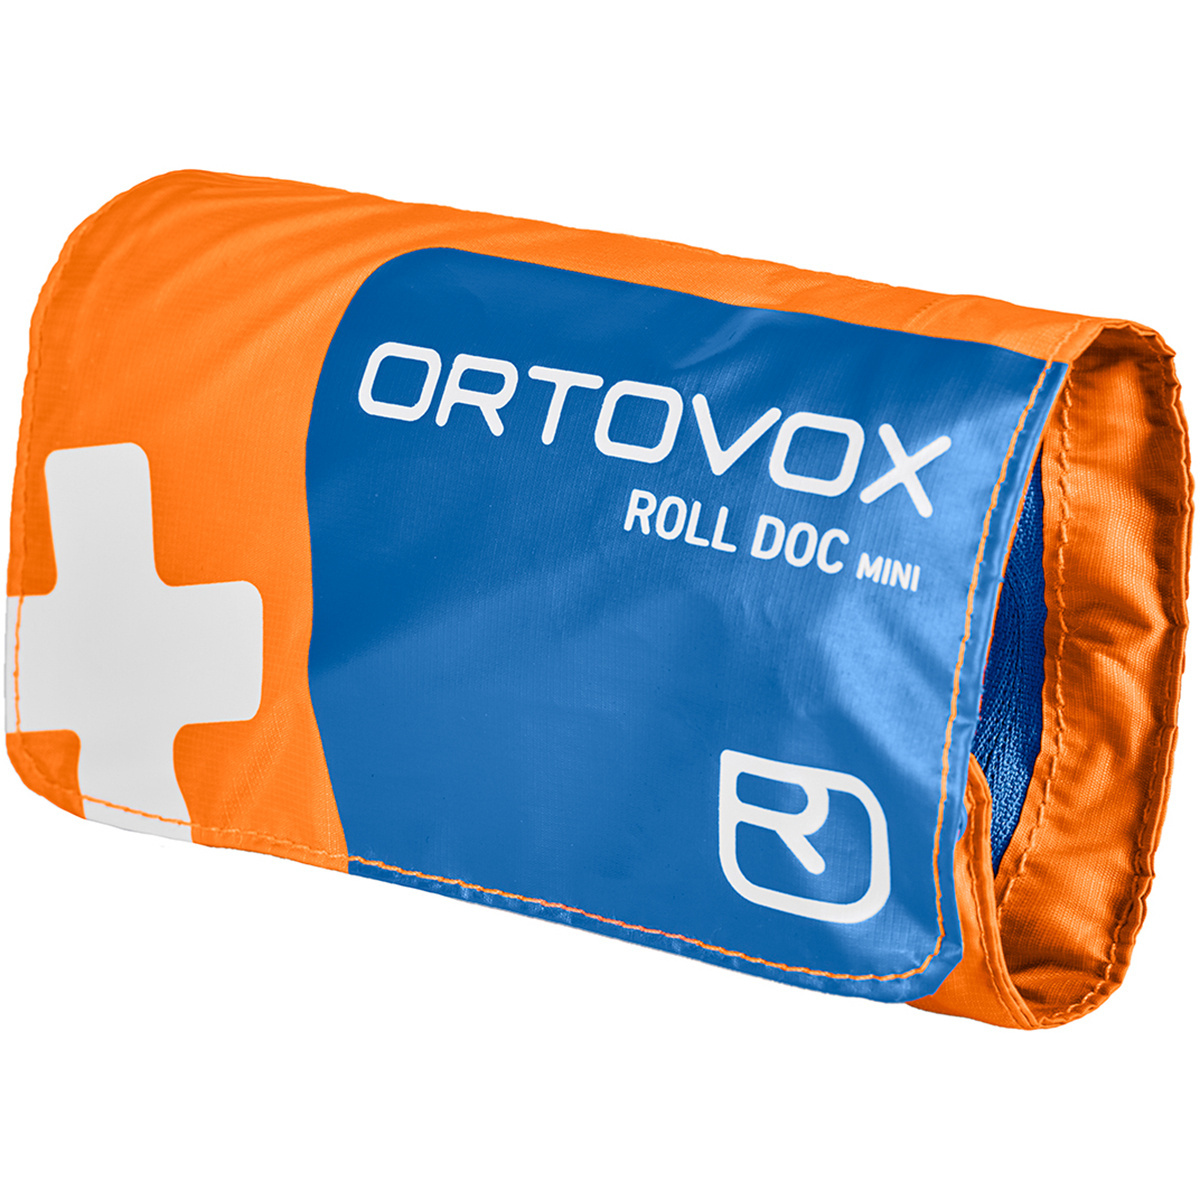 Image of Ortovox First Aid Roll Doc Mini